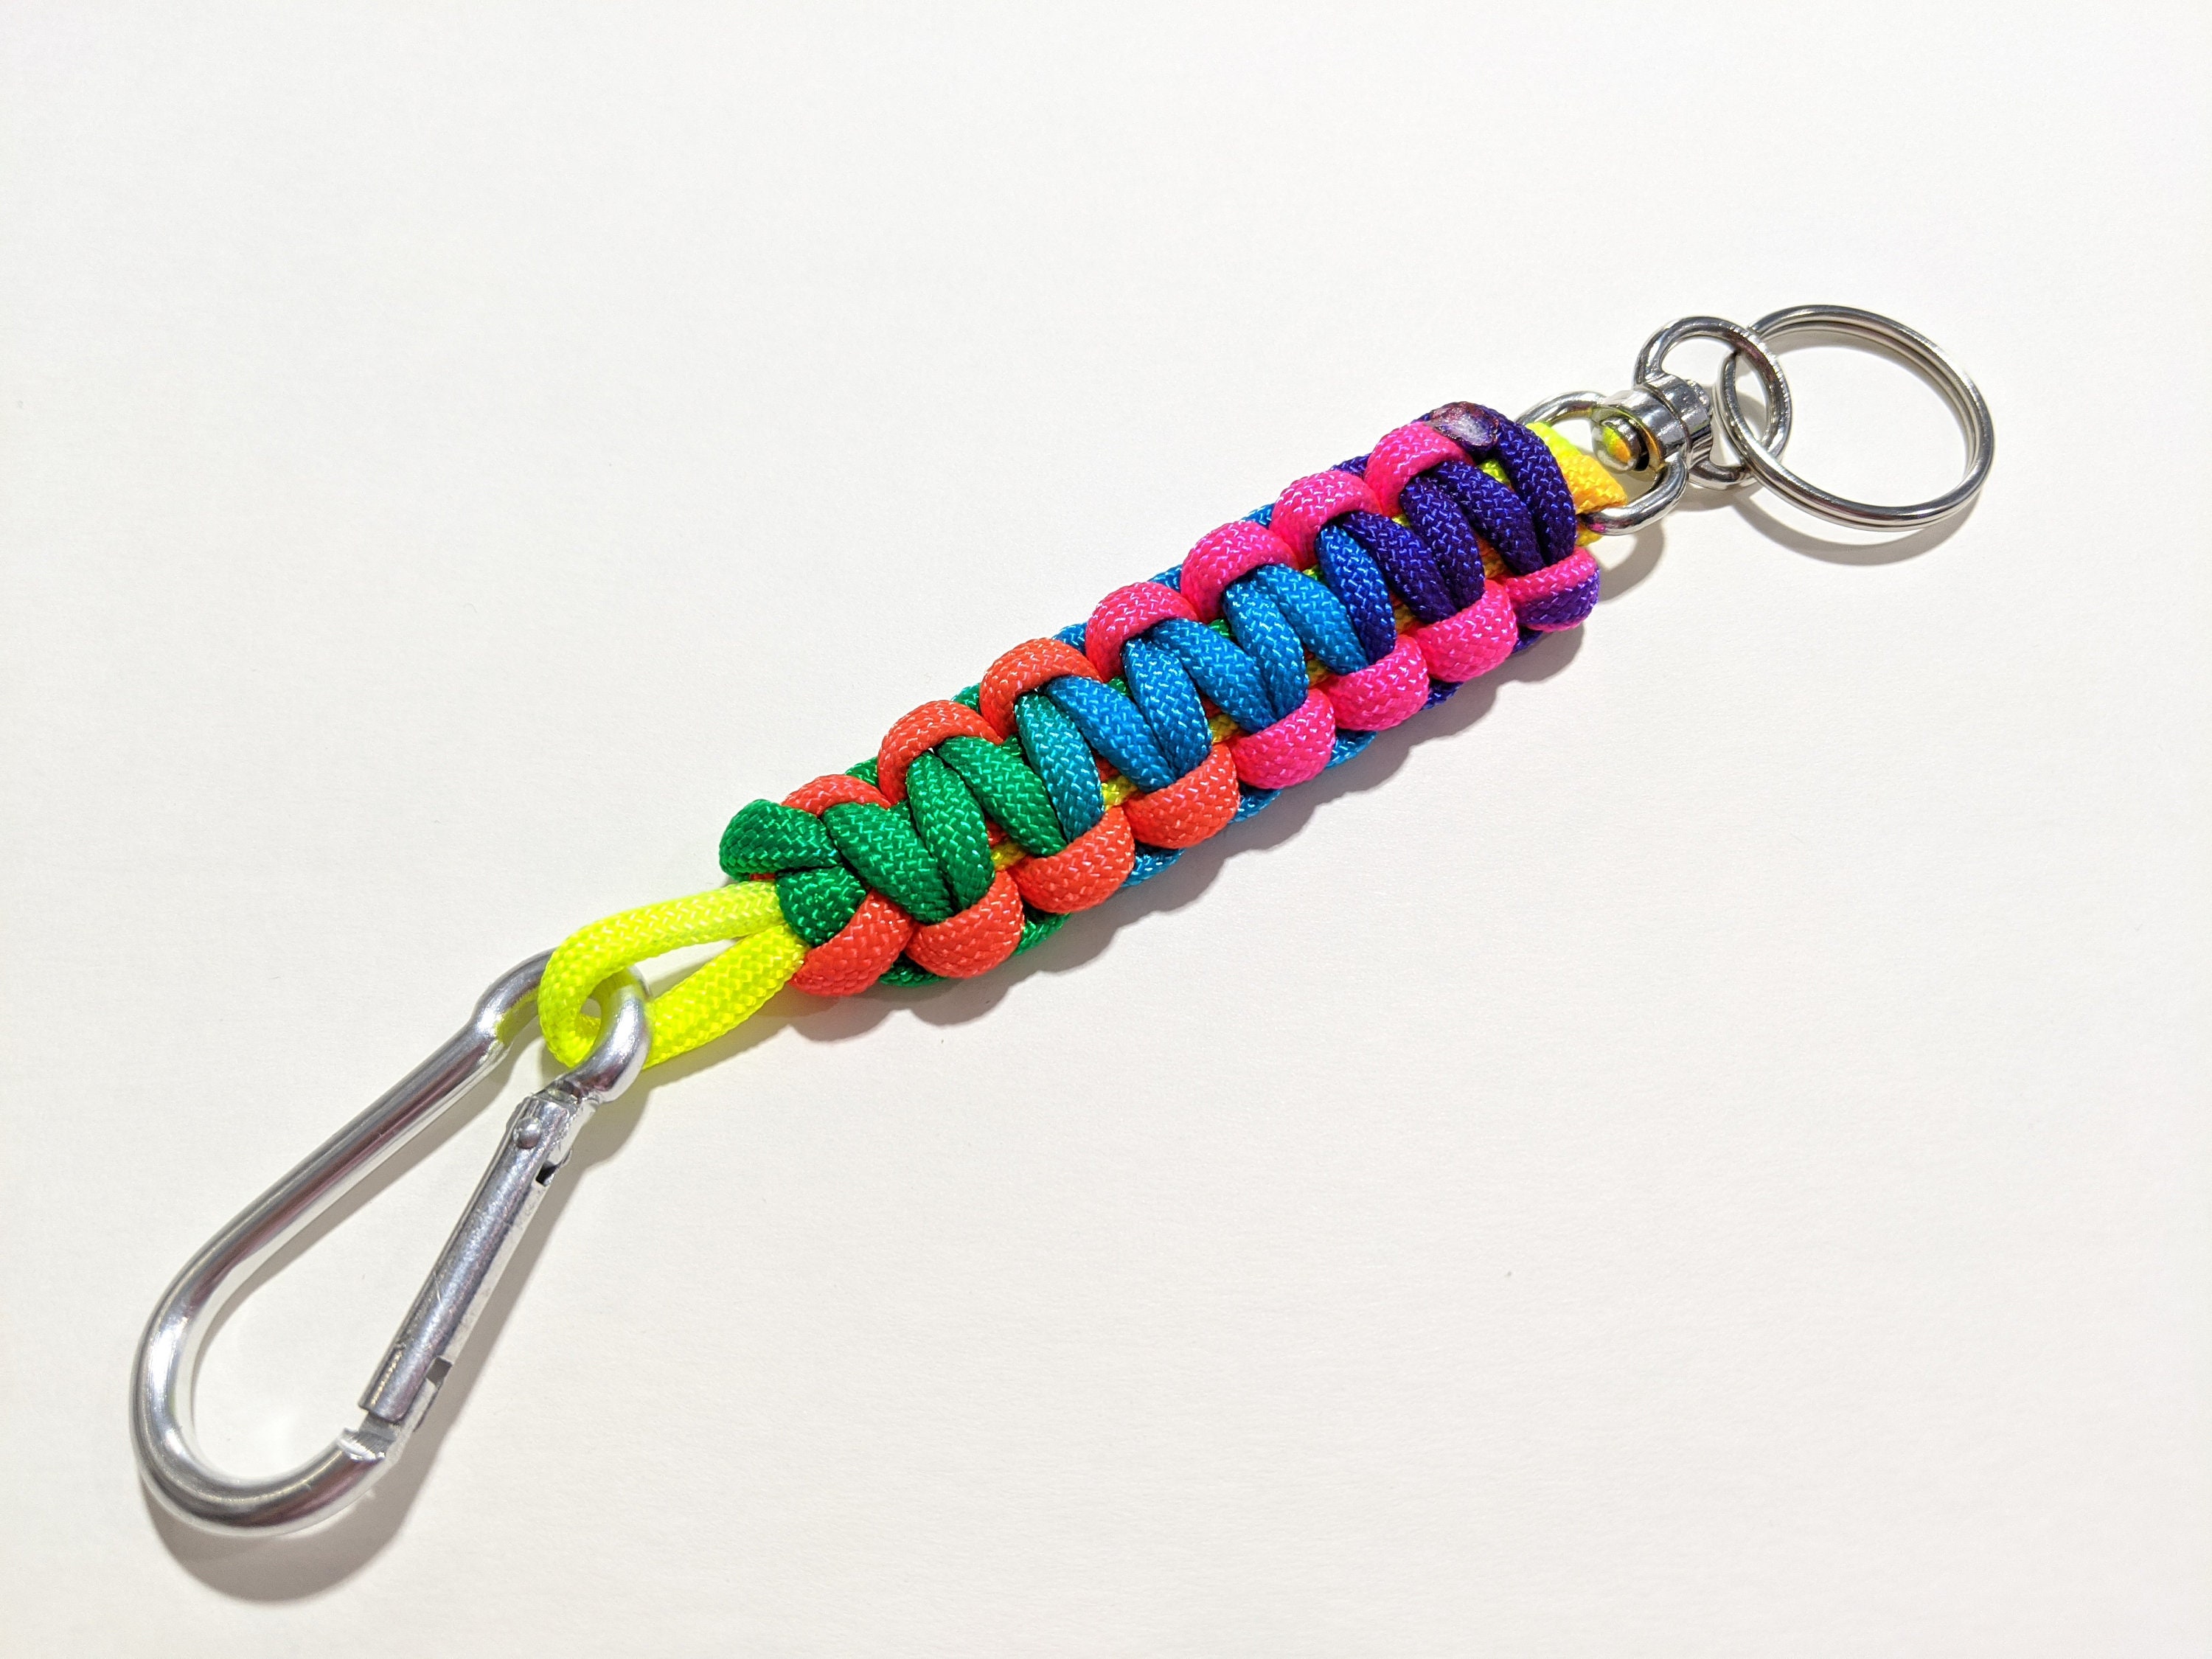 West Coast Paracord Butterfly Key Chain Key Clip - Double Sided Carabiner  Design in Multiple Colors & Pack Sizes